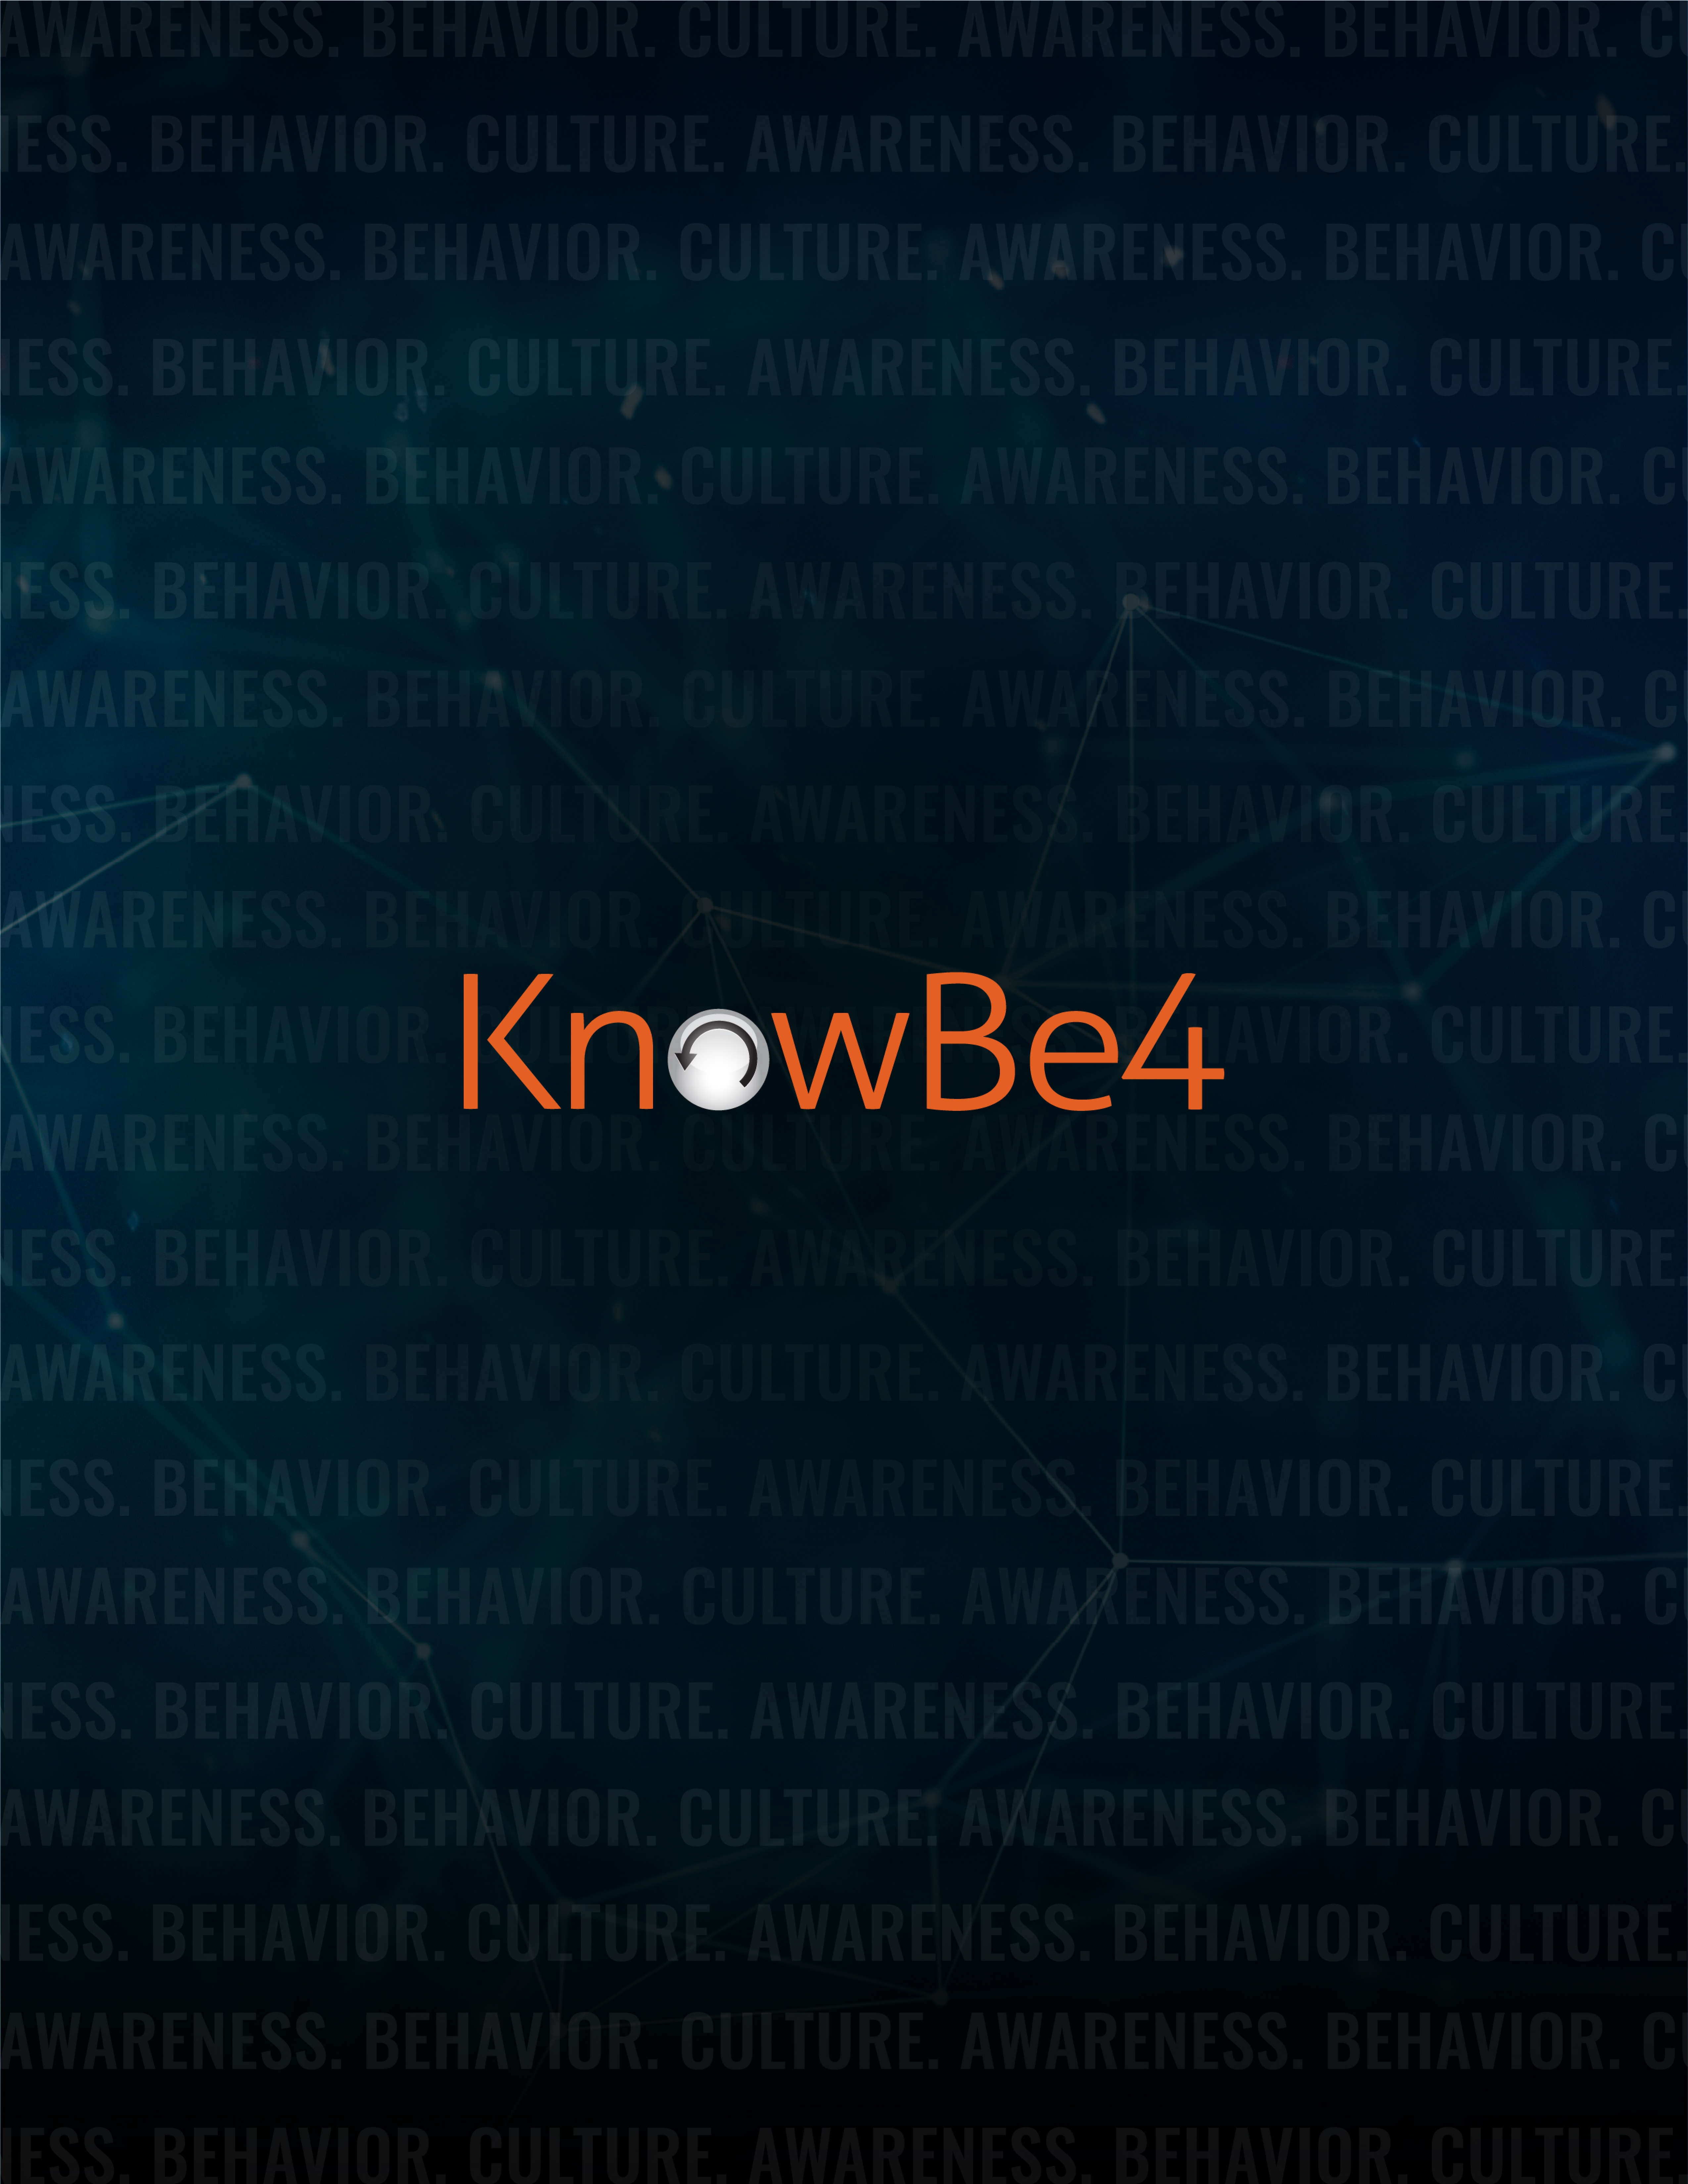 knowbe4cover6a.jpg